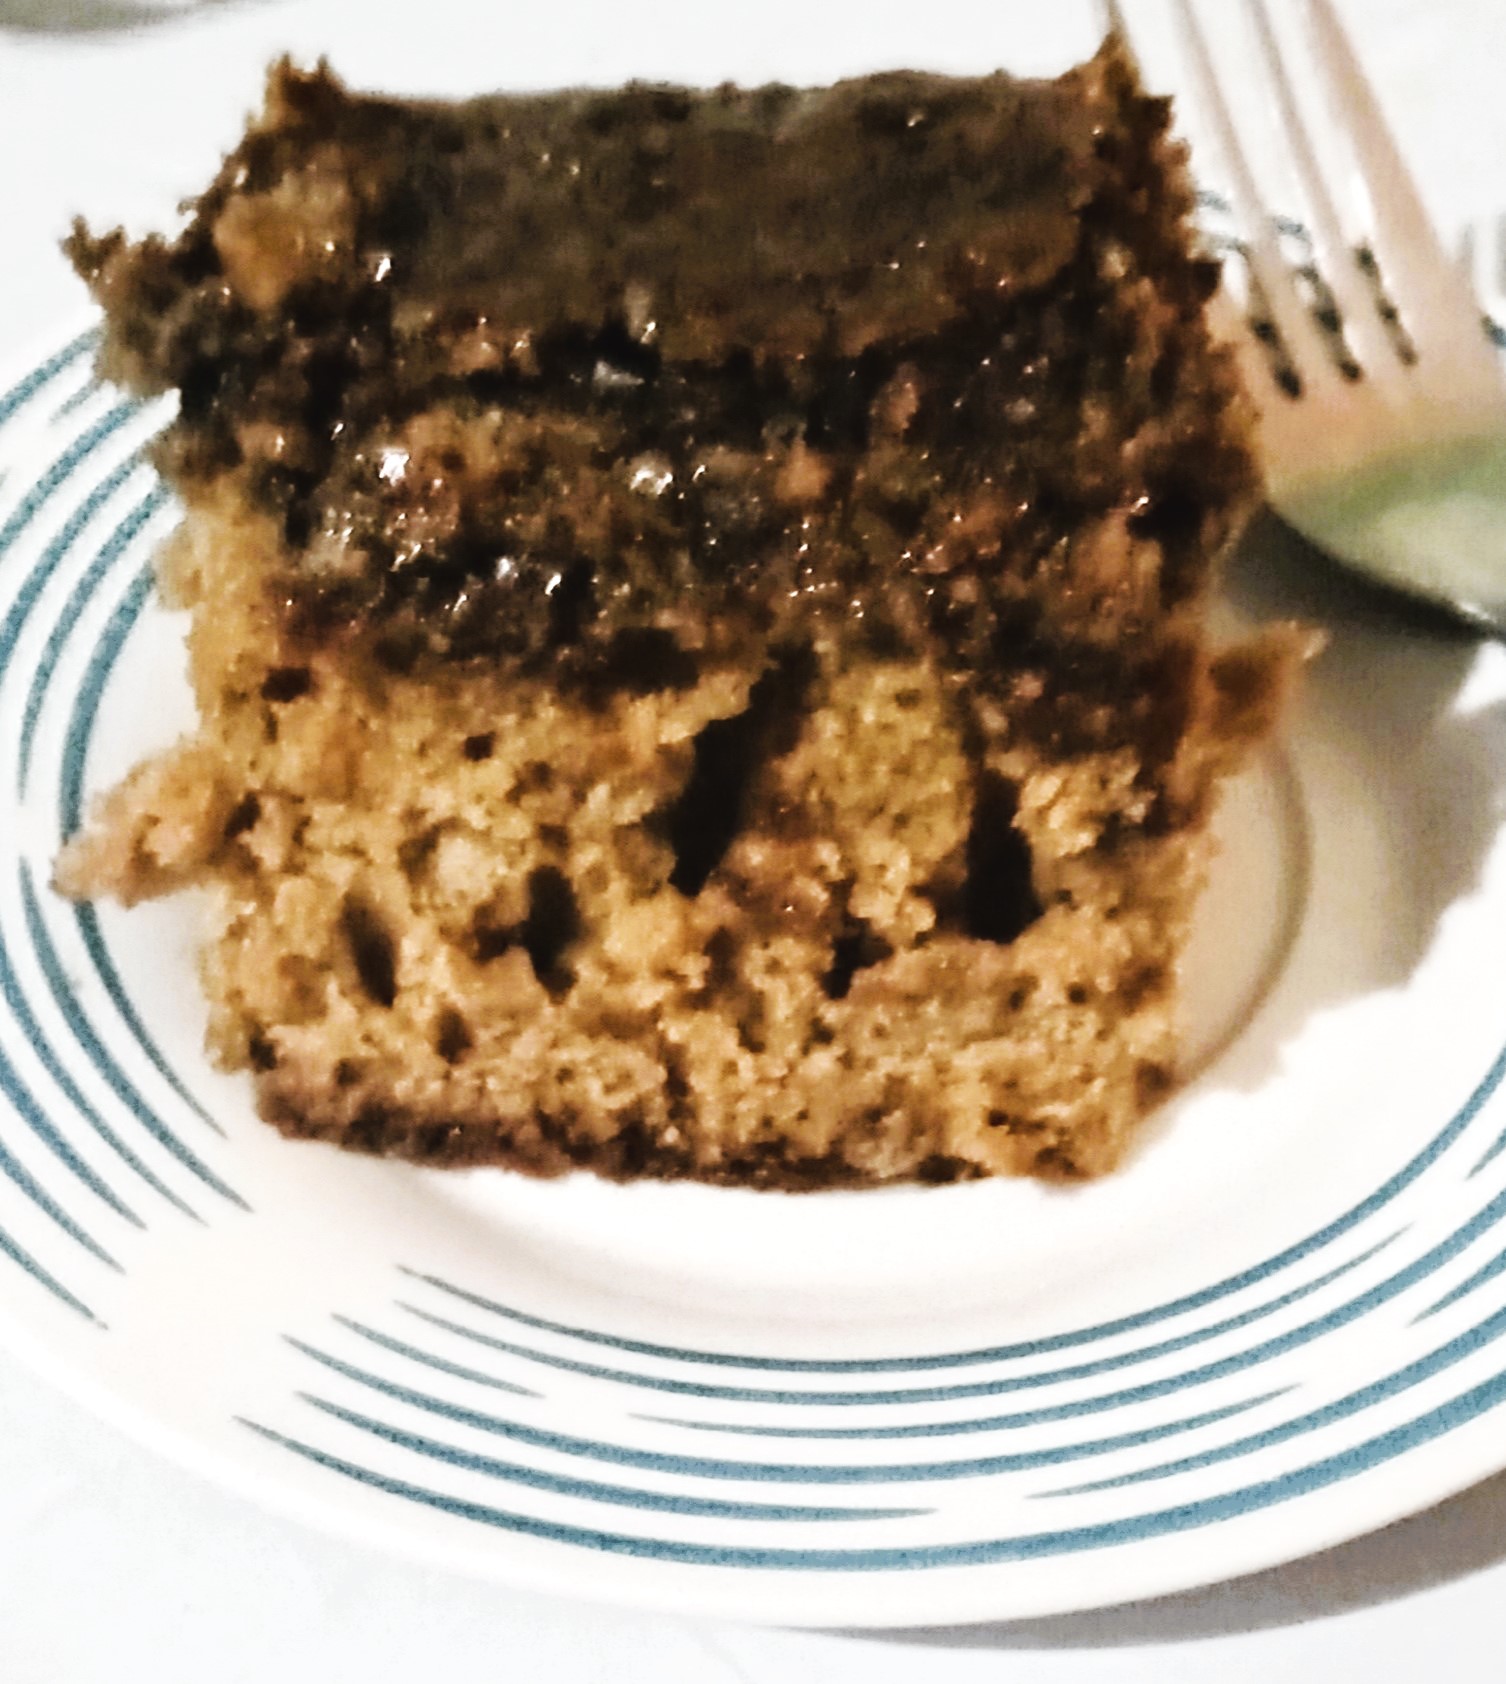 TORTA DE CACAO, CON AVENA Y RON./COCOA CAKE, WITH OATMEAL AND RUM.